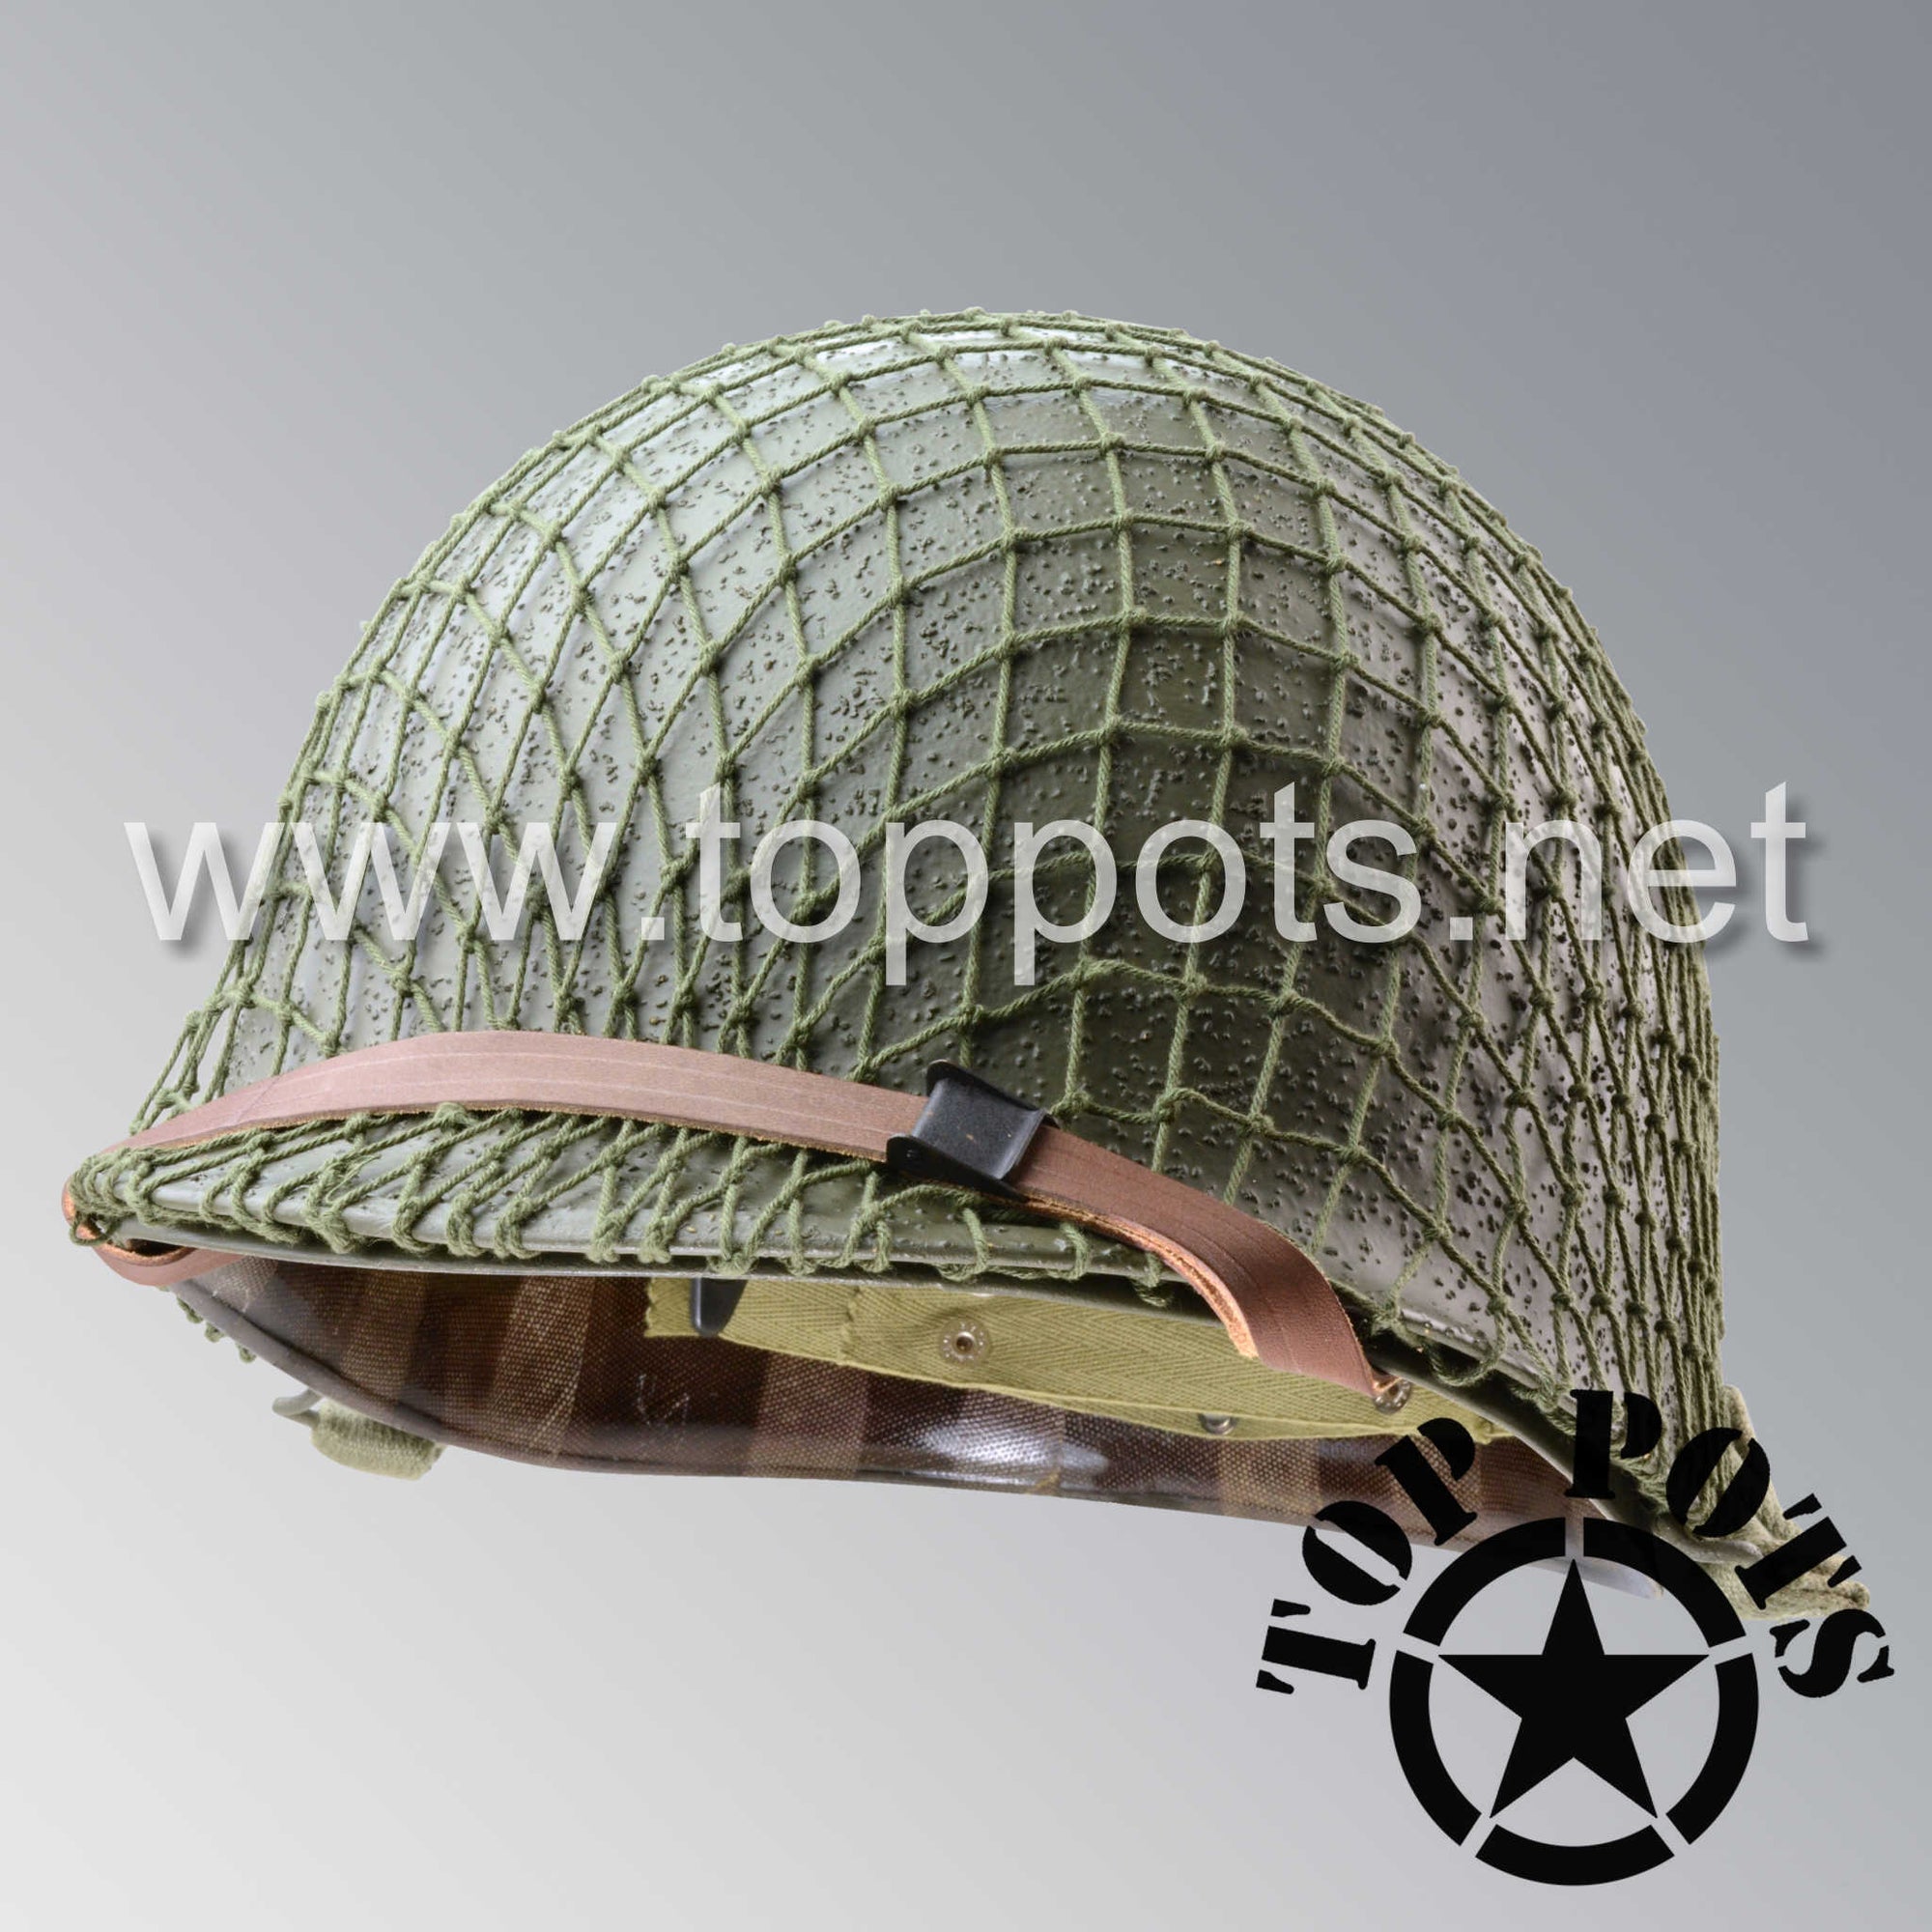 WWII US Army Restored Original M1 Infantry Helmet Swivel Bale McCord Shell and Liner with Olive Drab Net